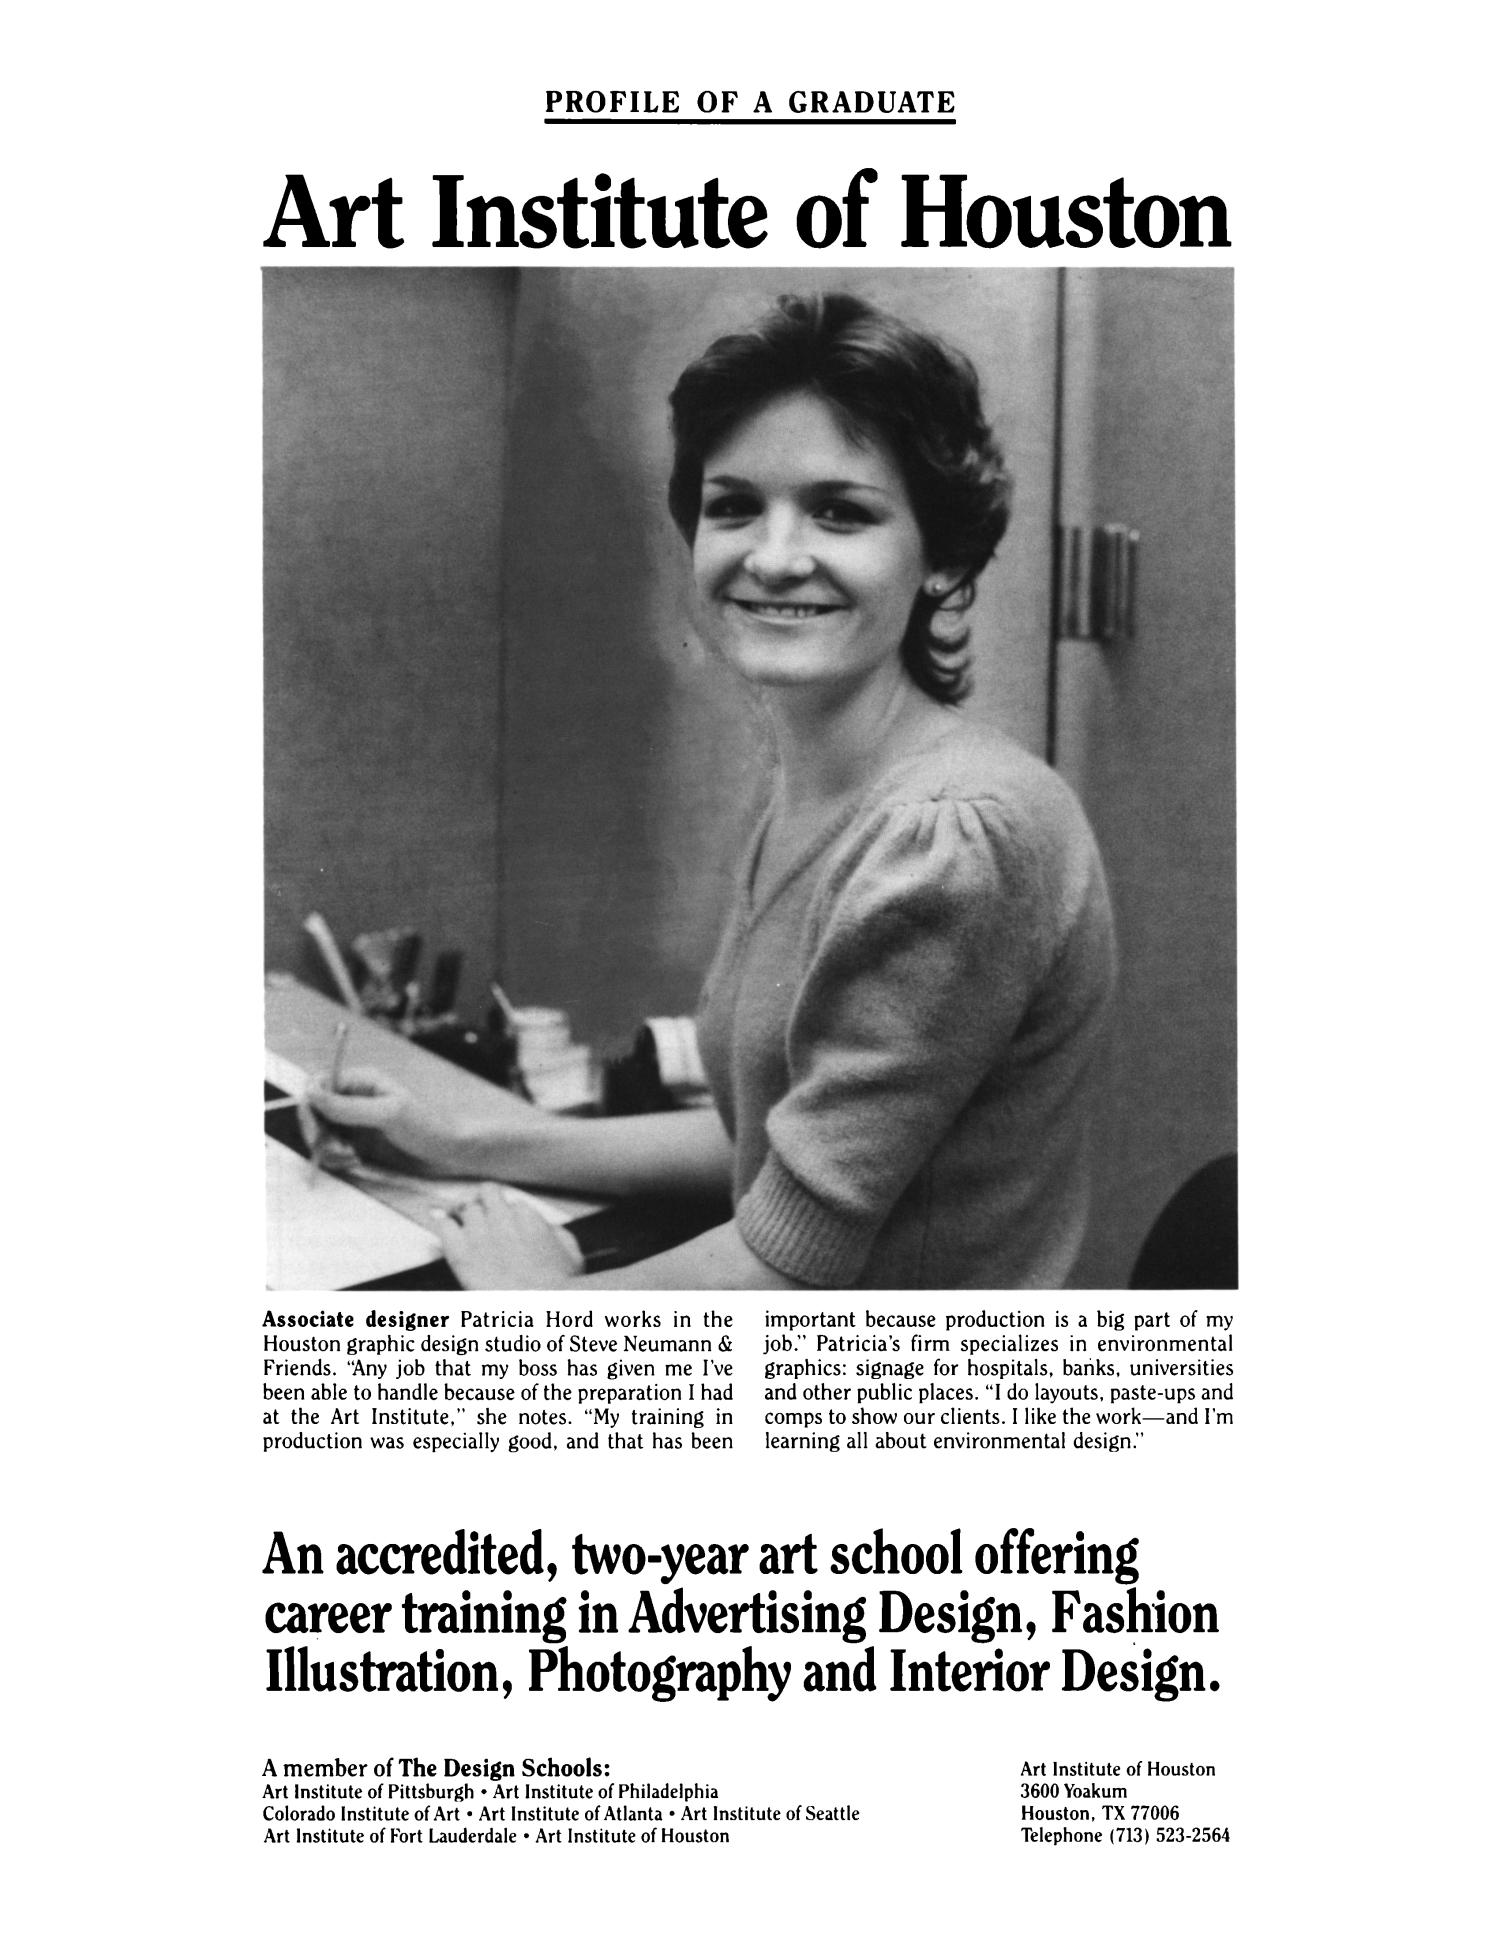 Texas Trends in Art Education, Volume 2, Number 8, Fall 1983
                                                
                                                    1
                                                